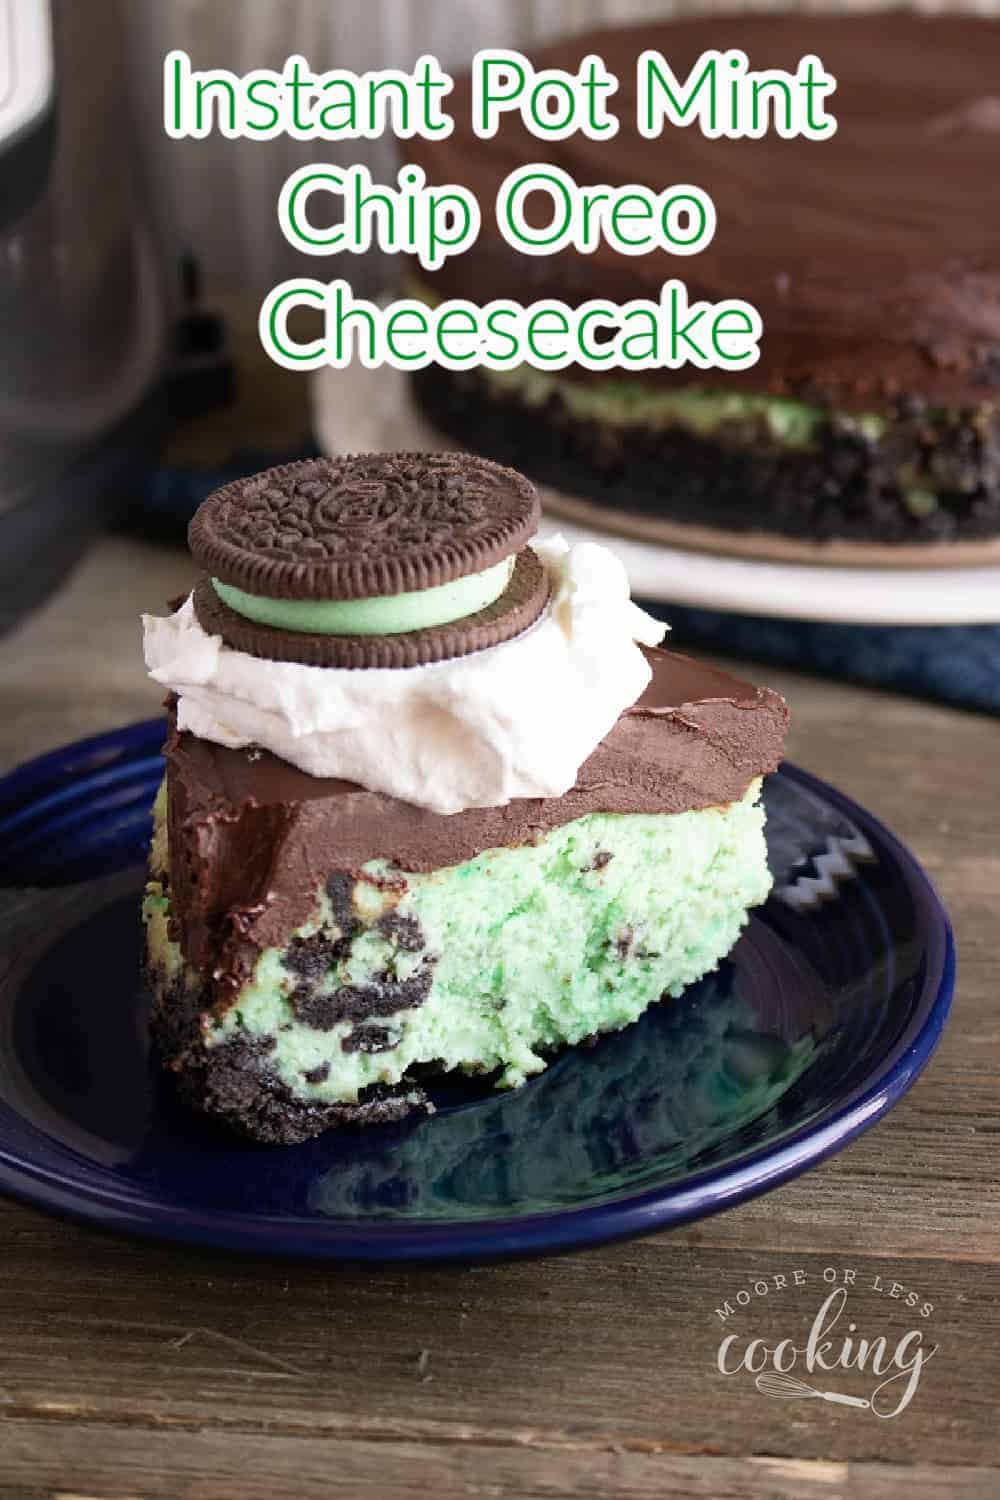 Let your Instant Pot make the most delectable mint Oreo cheesecake that you've ever tasted. An Oreo crust holds the minty cheesecake mixture that's topped with a chocolate ganache. It's a decadent dessert that's made even easier by using your pressure cooker. via @Mooreorlesscook